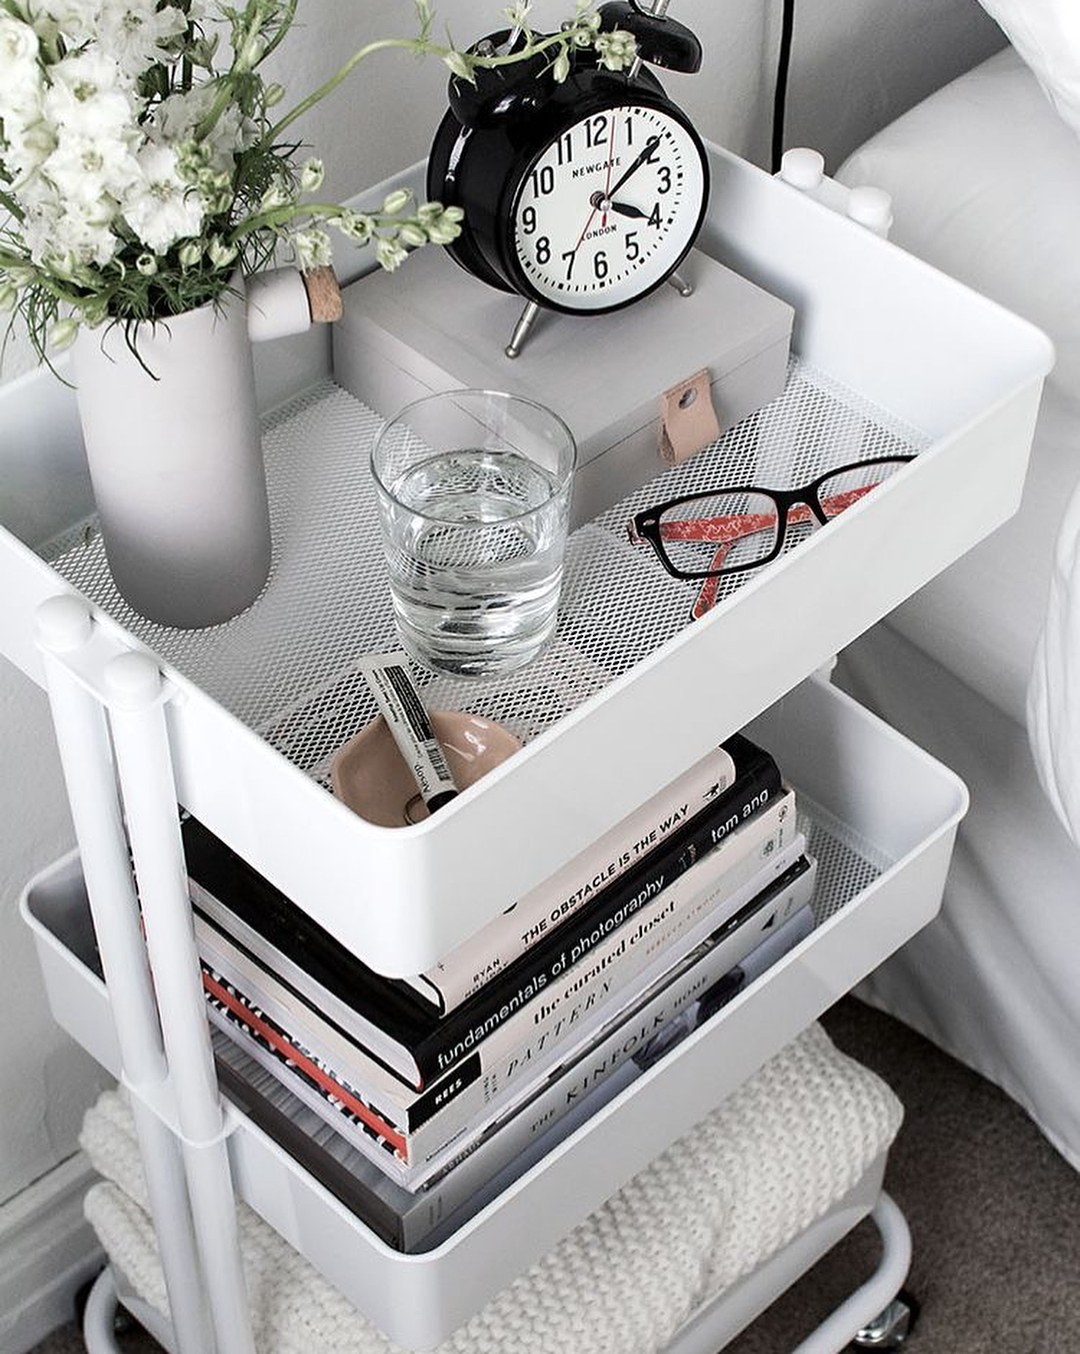 White rolling storage cart filled with decor next to bed. Photo by Instagram user @housejunkie_